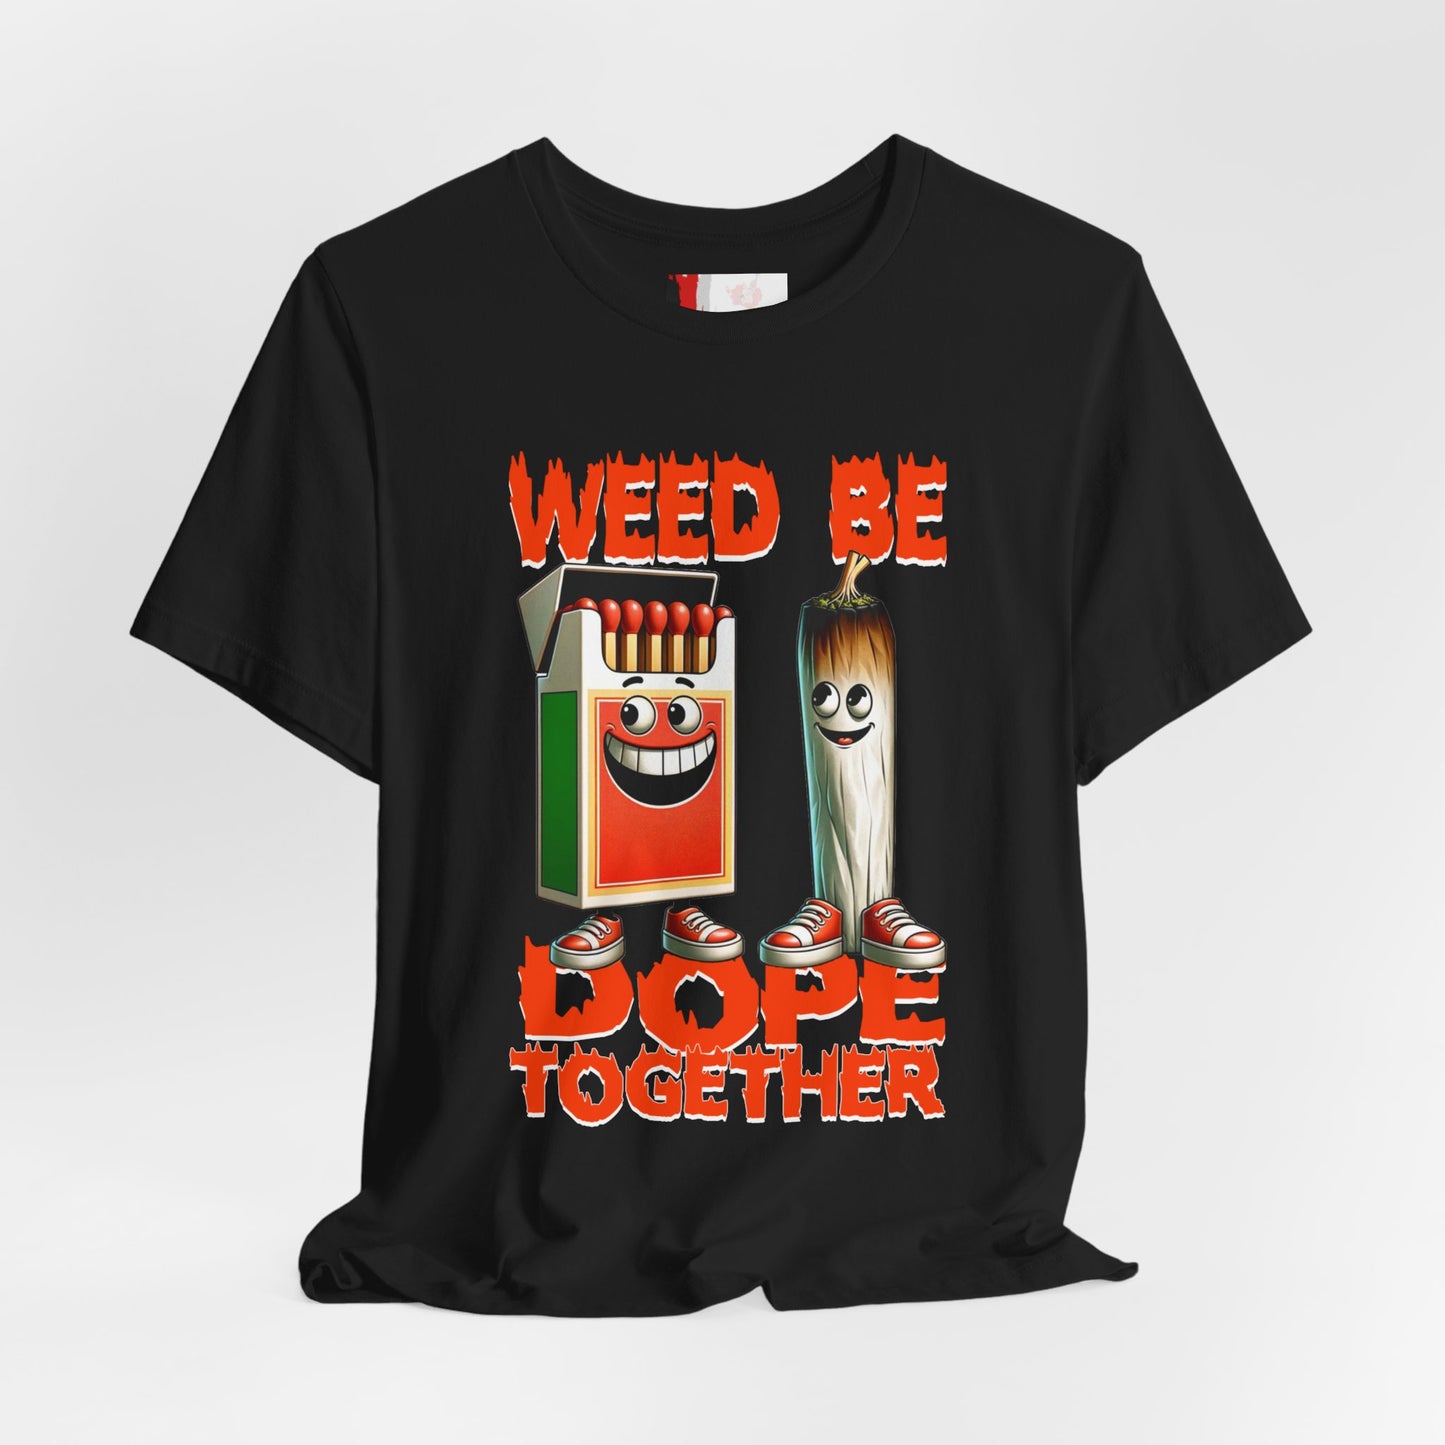 WEED BE DOPE TOGETHER